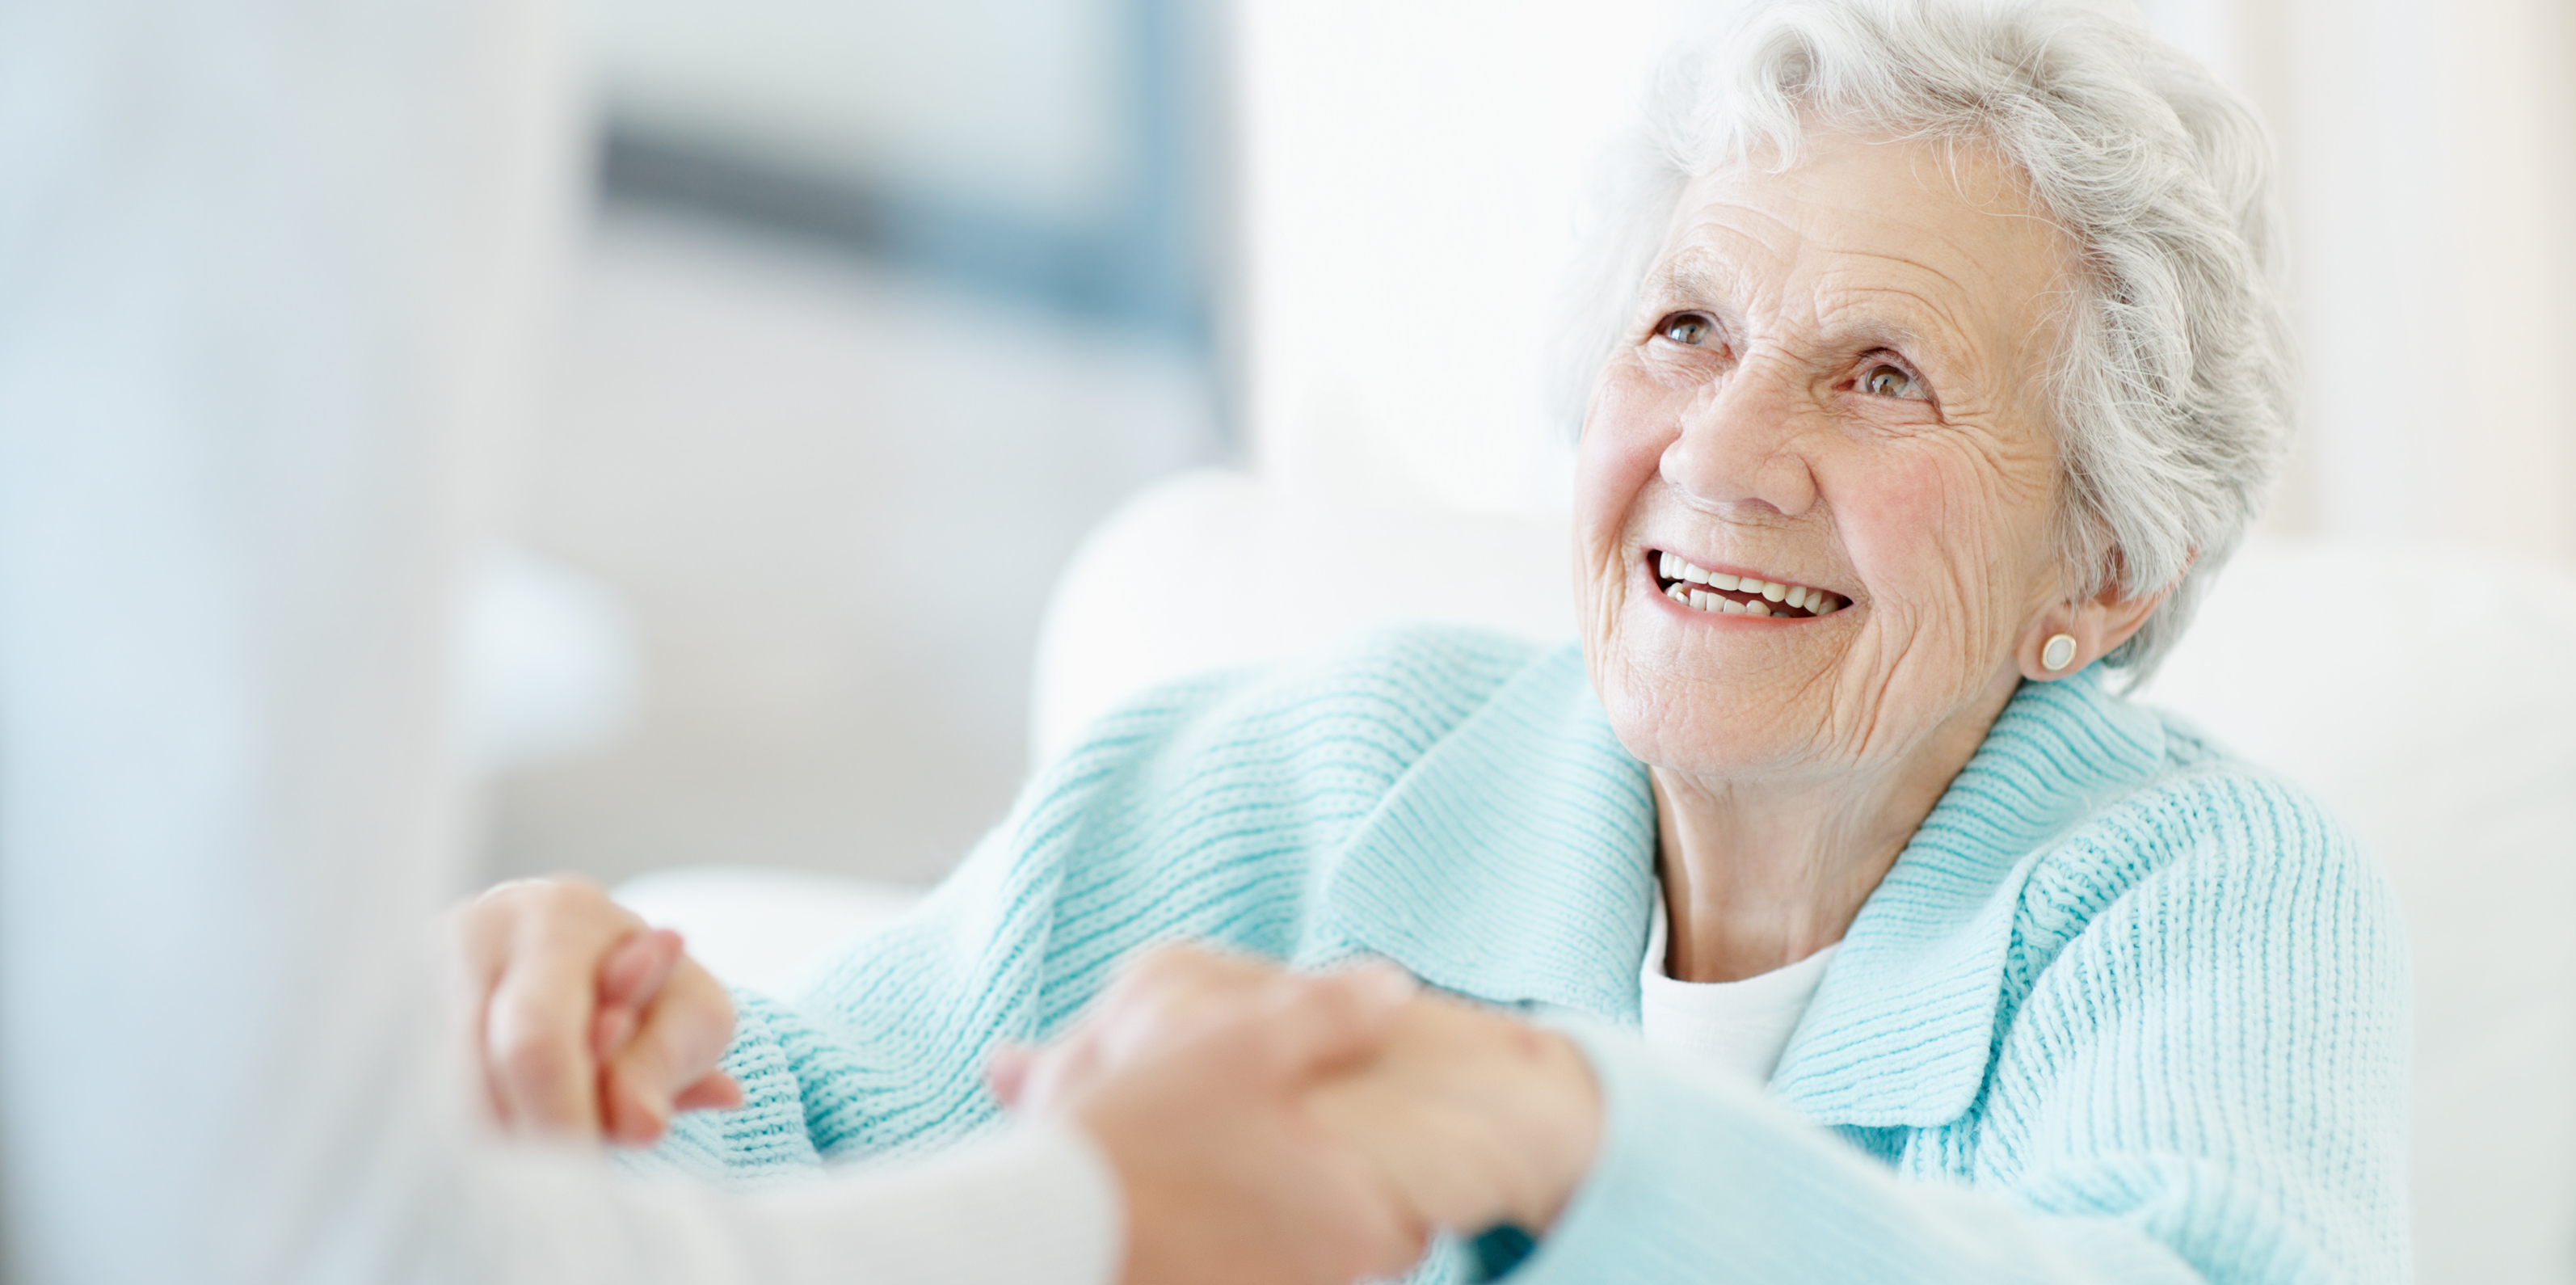 Elderly patient or resident in nursing home, skilled nursing, long term care facility.